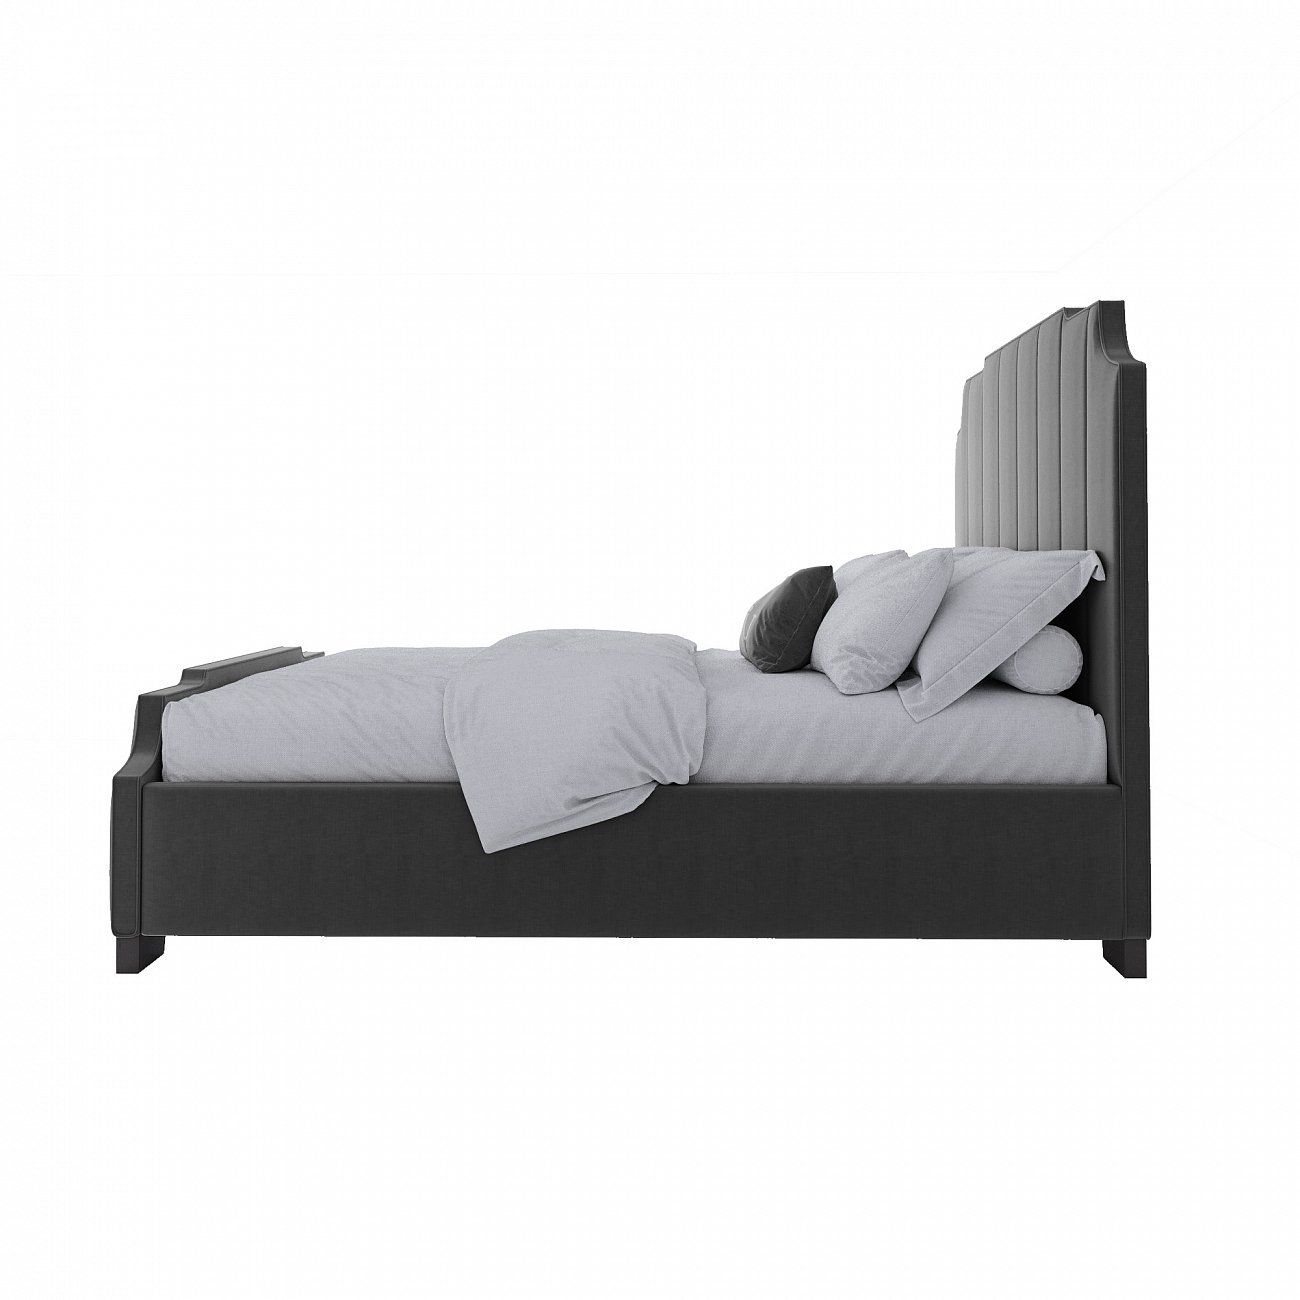 Bony double bed with upholstered headboard 160x200 cm black